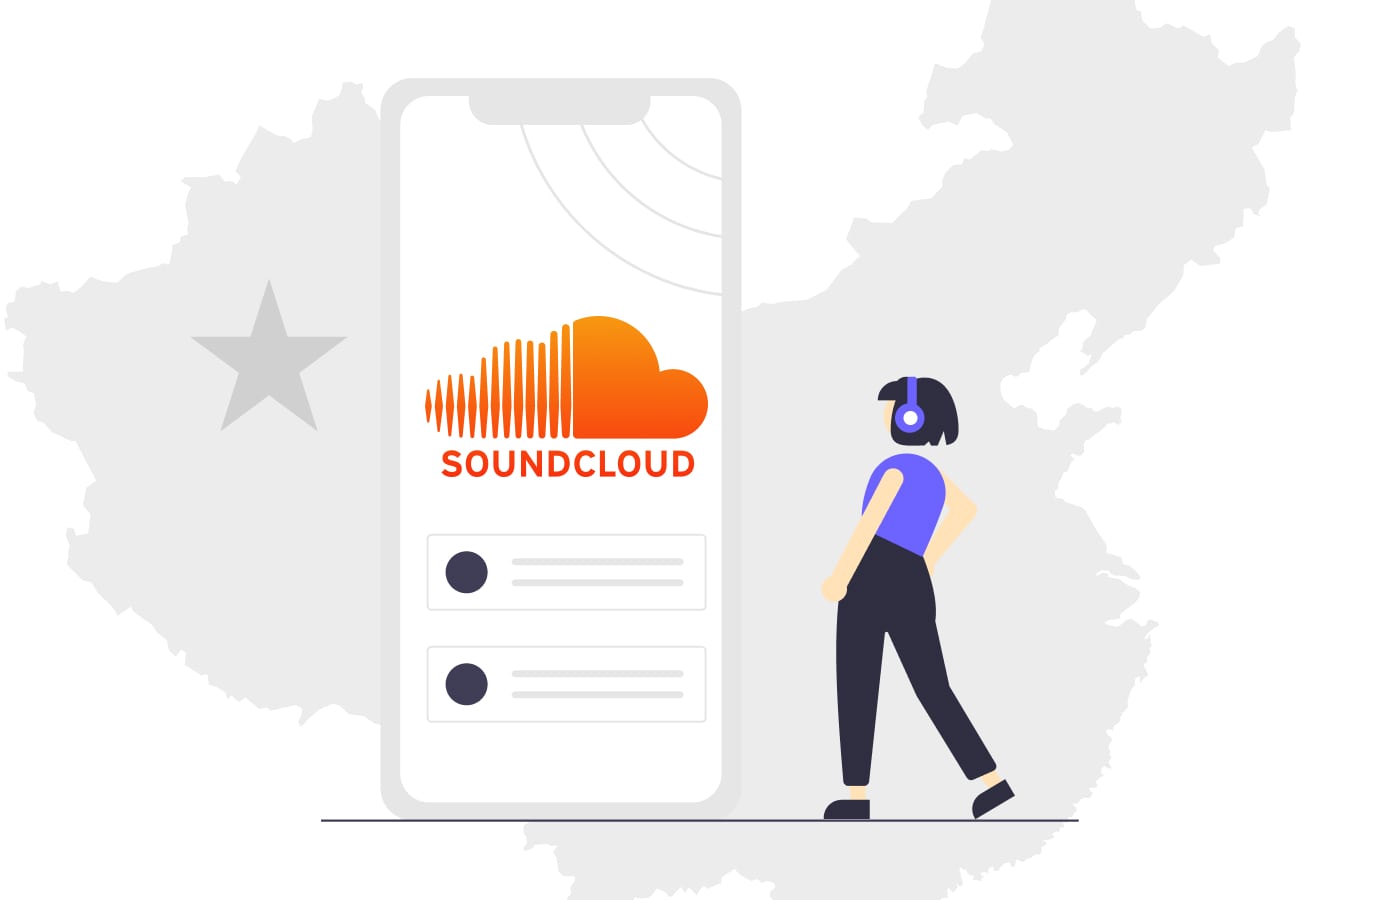 SoundCloud was banned in Russia for spreading bogus news